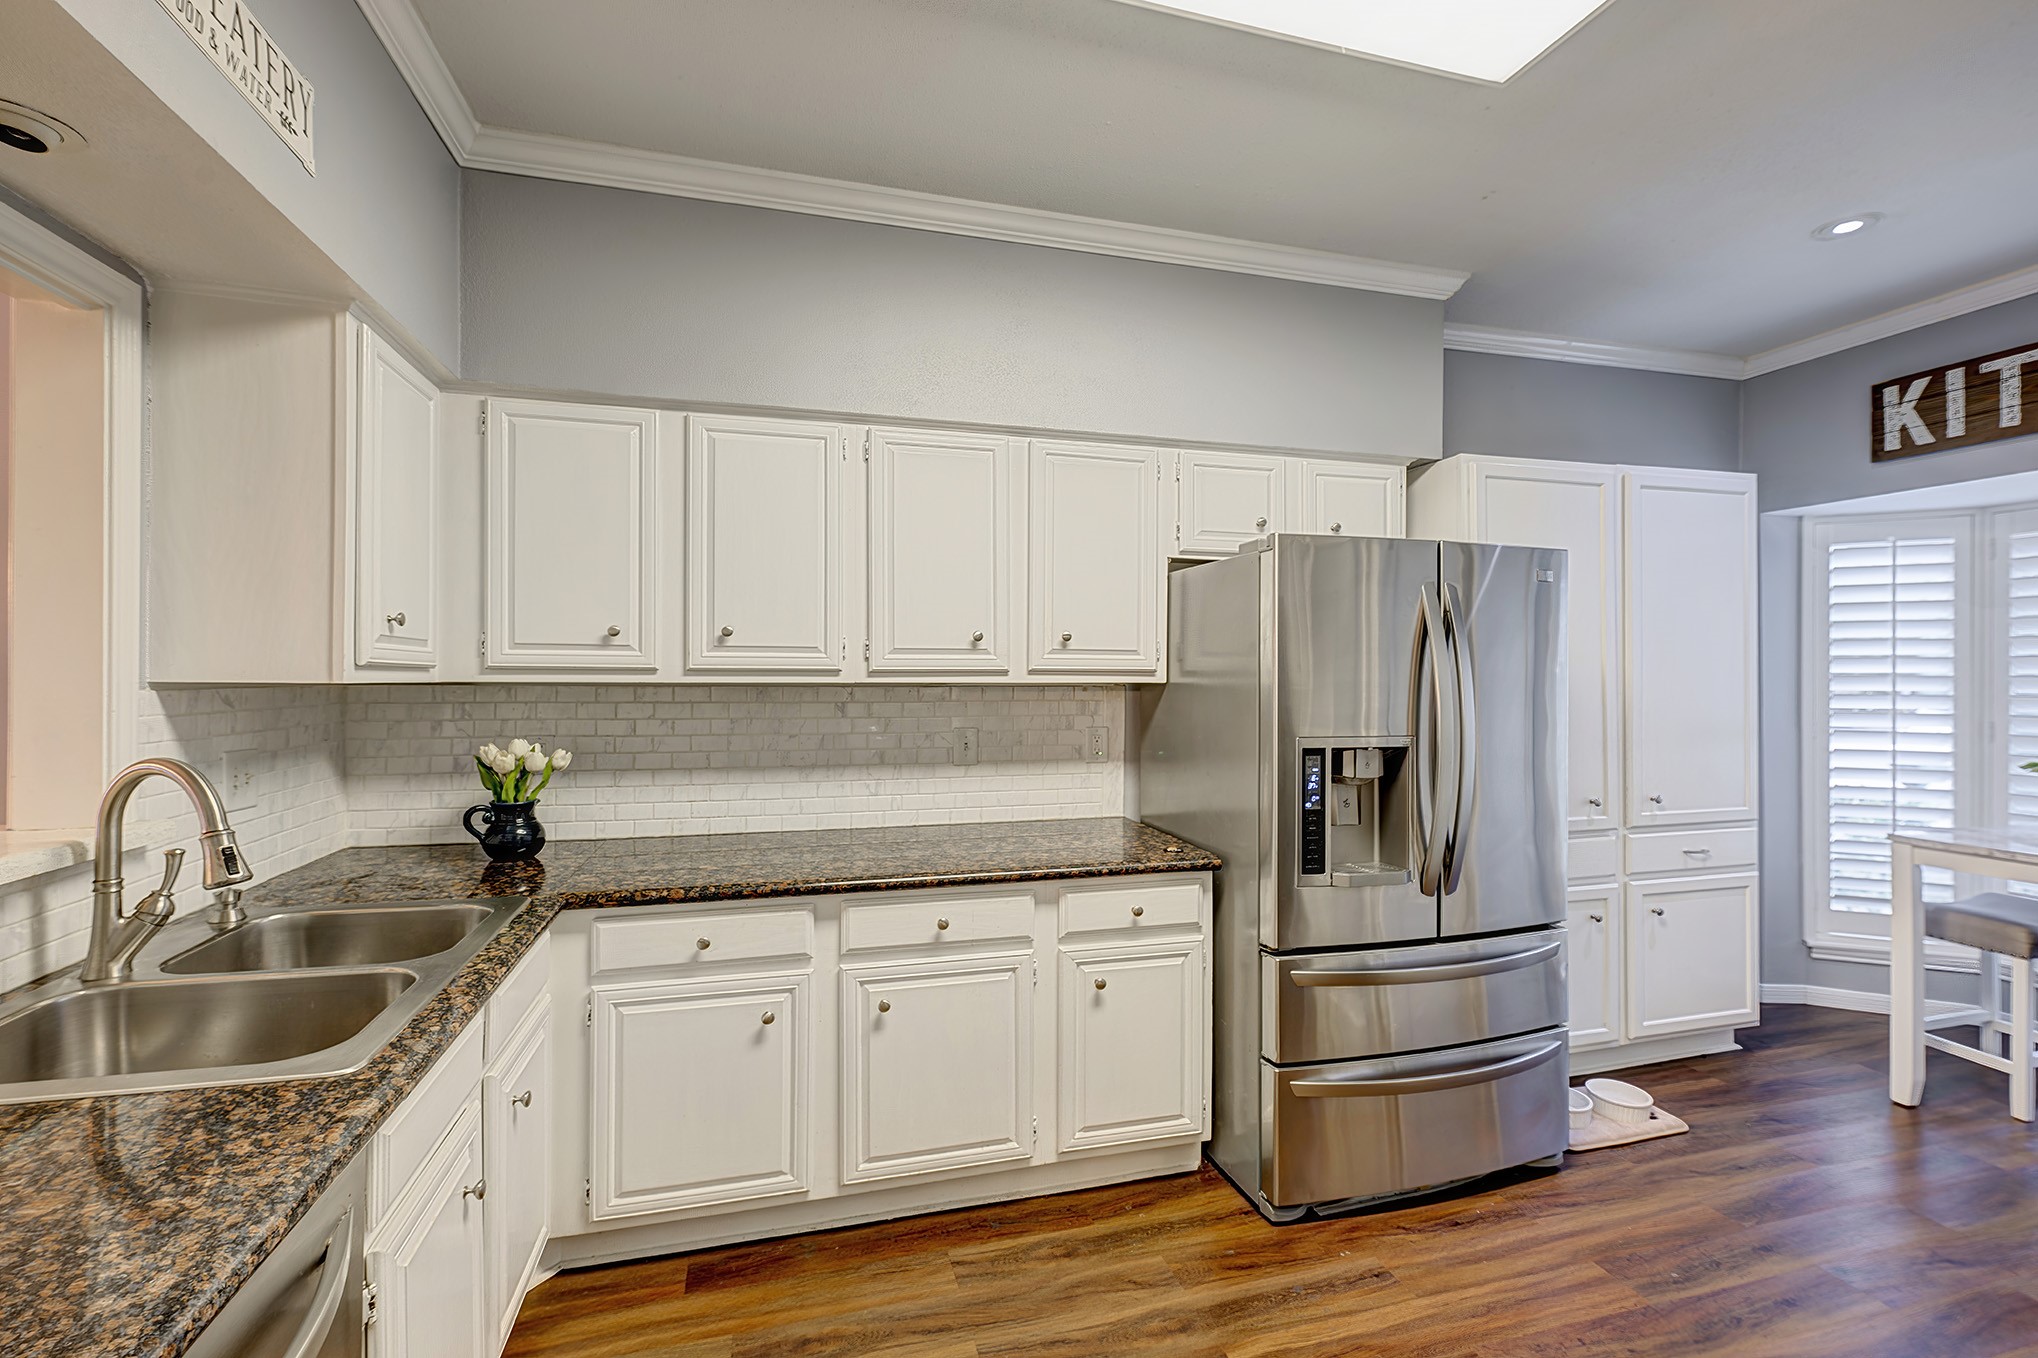 Take note of the expansive dimensions of the kitchen, complete with personalized cabinetry and a designated area for enjoying breakfast. Its level of detail and intricacy is truly impressive.